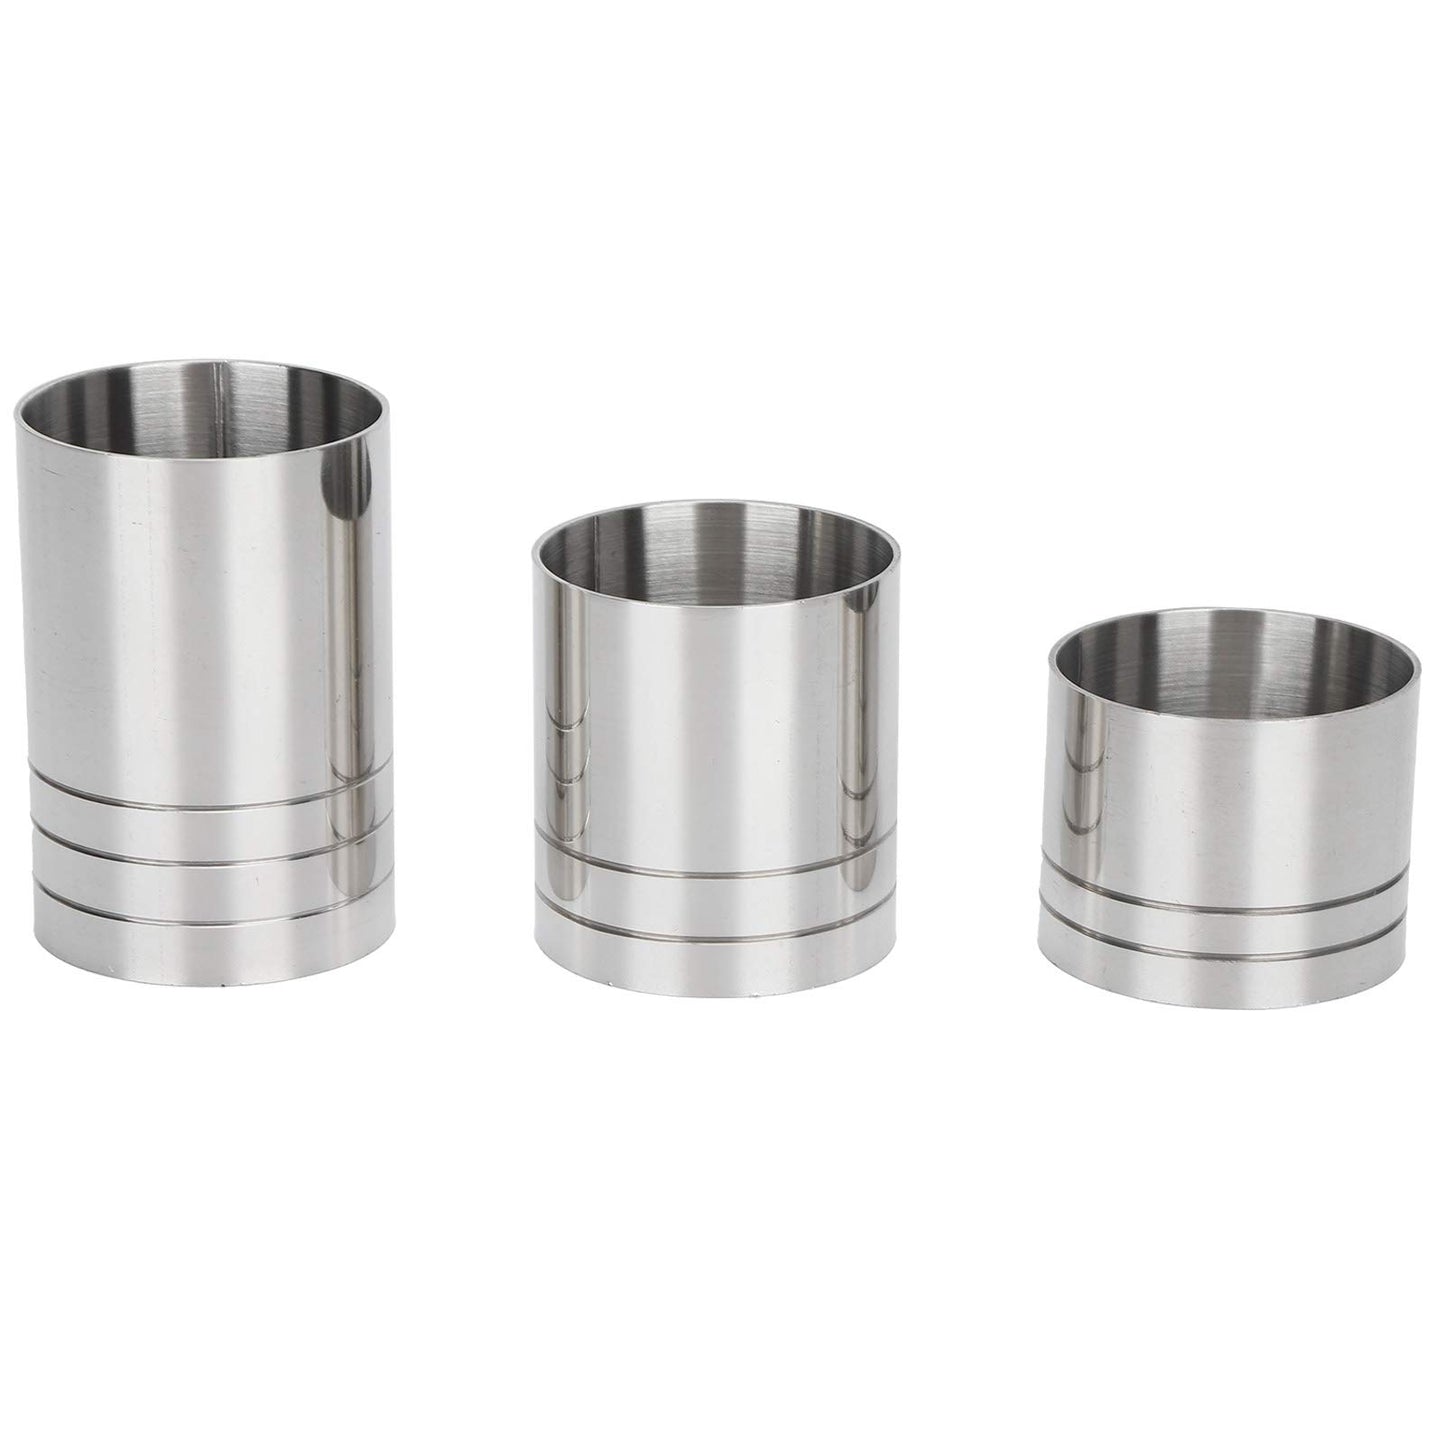 Premium Stainless Steel Cocktail Jigger Bar Drink Measuring Cup Ounce Cup Set Bartender Tool Three-Piece Suit(25ml+35ml+50ml) Cocktail Shaker Sets Bartender Tool Cup